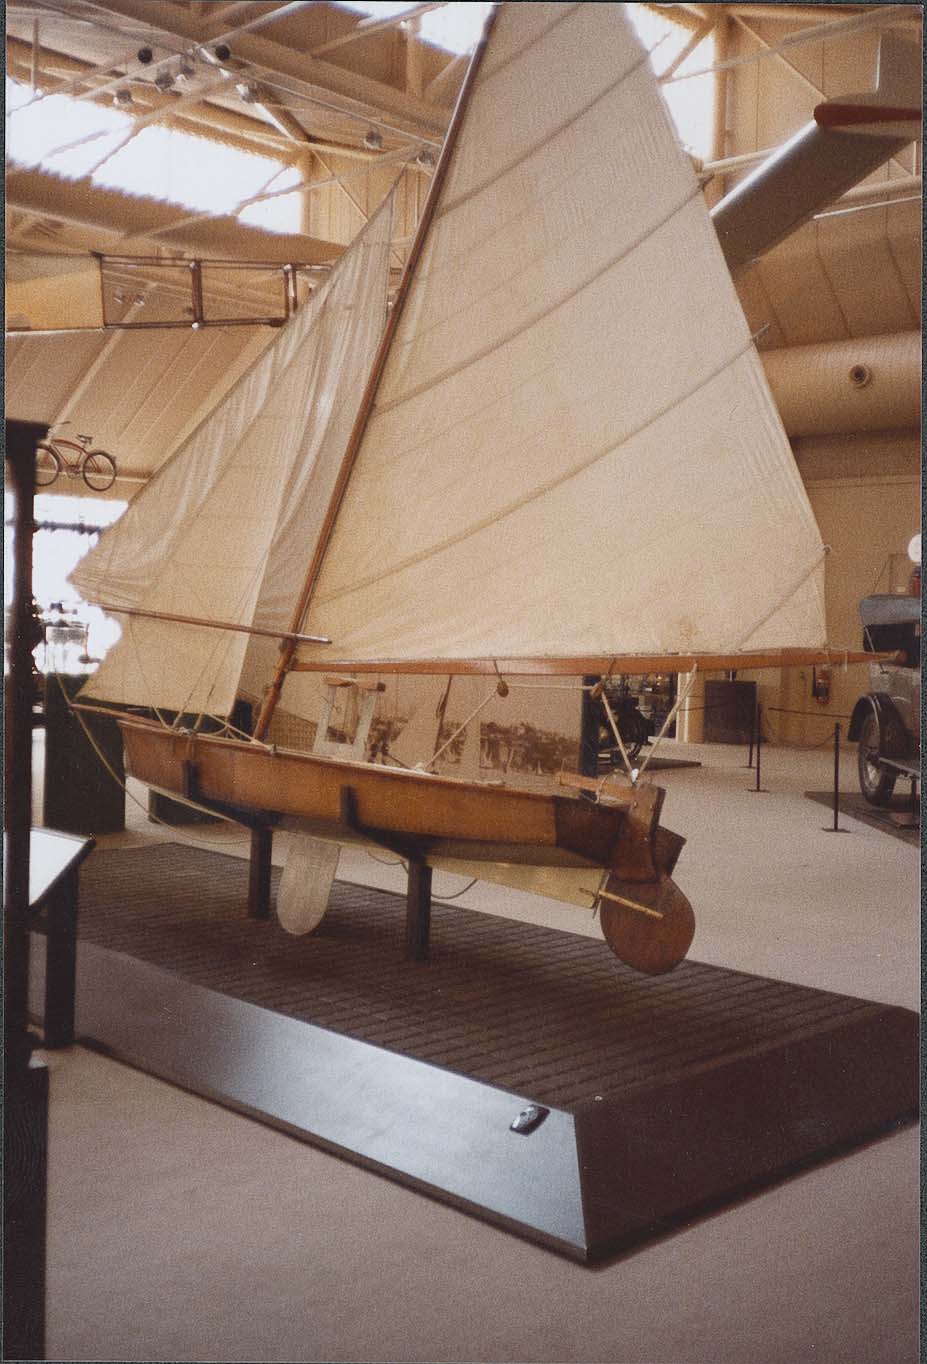 VJ sailing boat 'Giselle' designed by Charles Sparrow